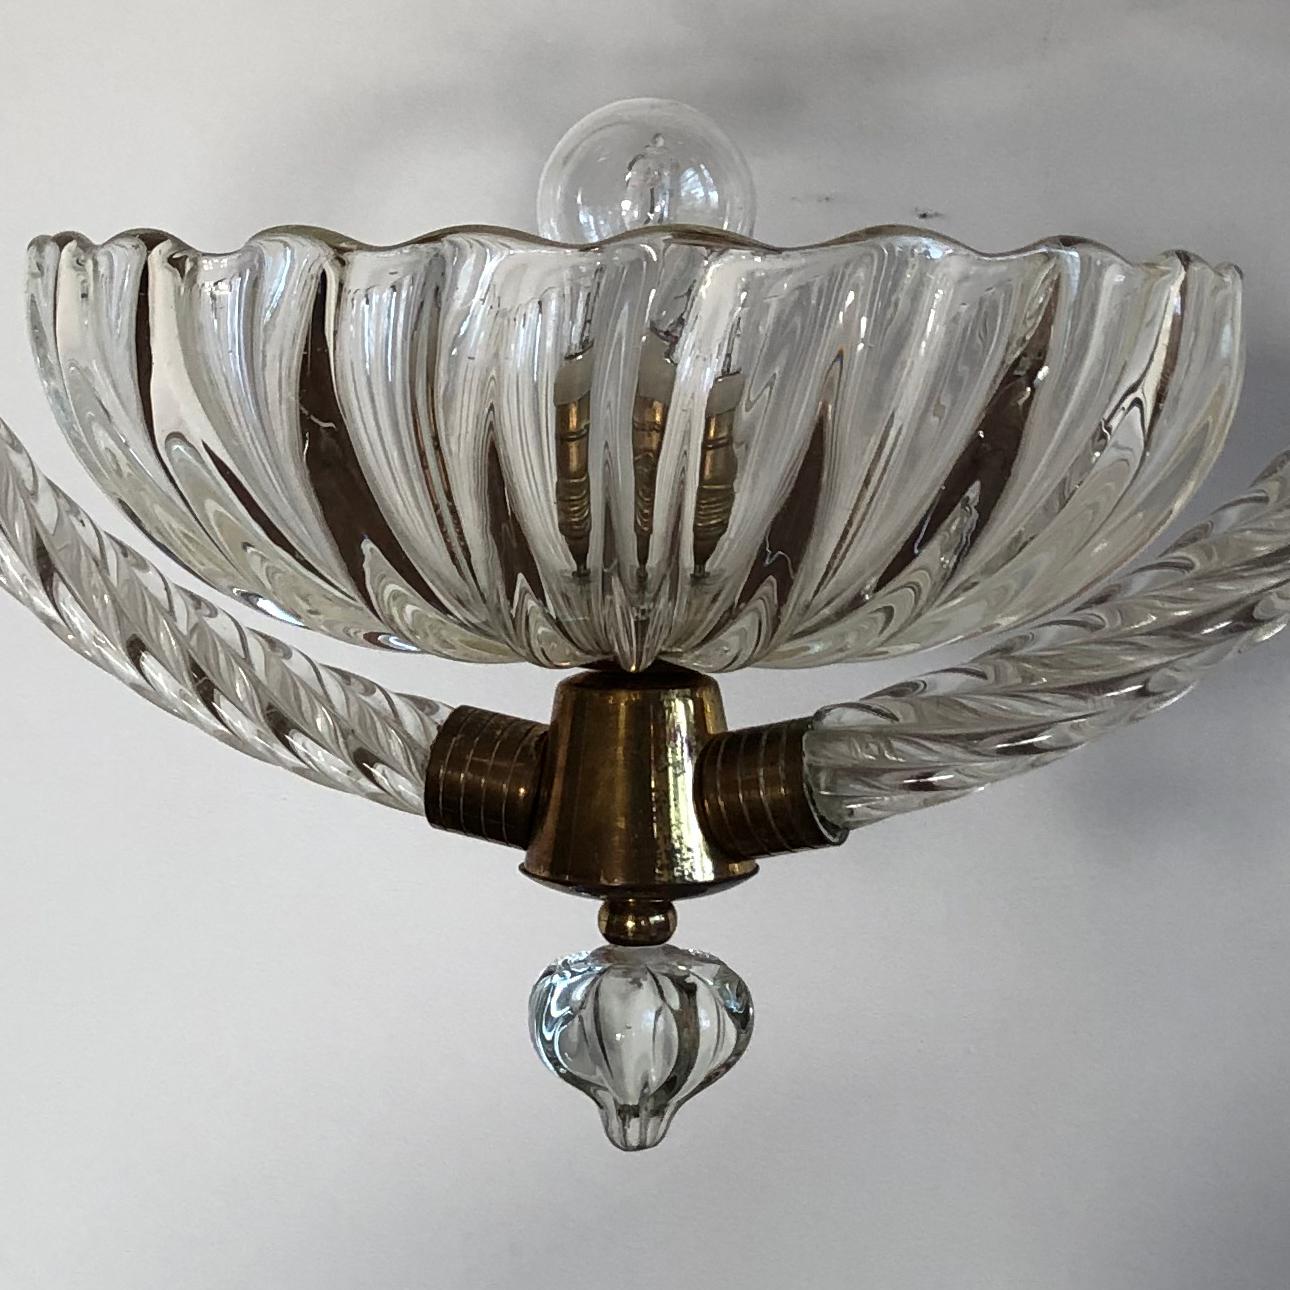 Ercole Barovier Murano Chandelier, Italy, 1940s For Sale 1